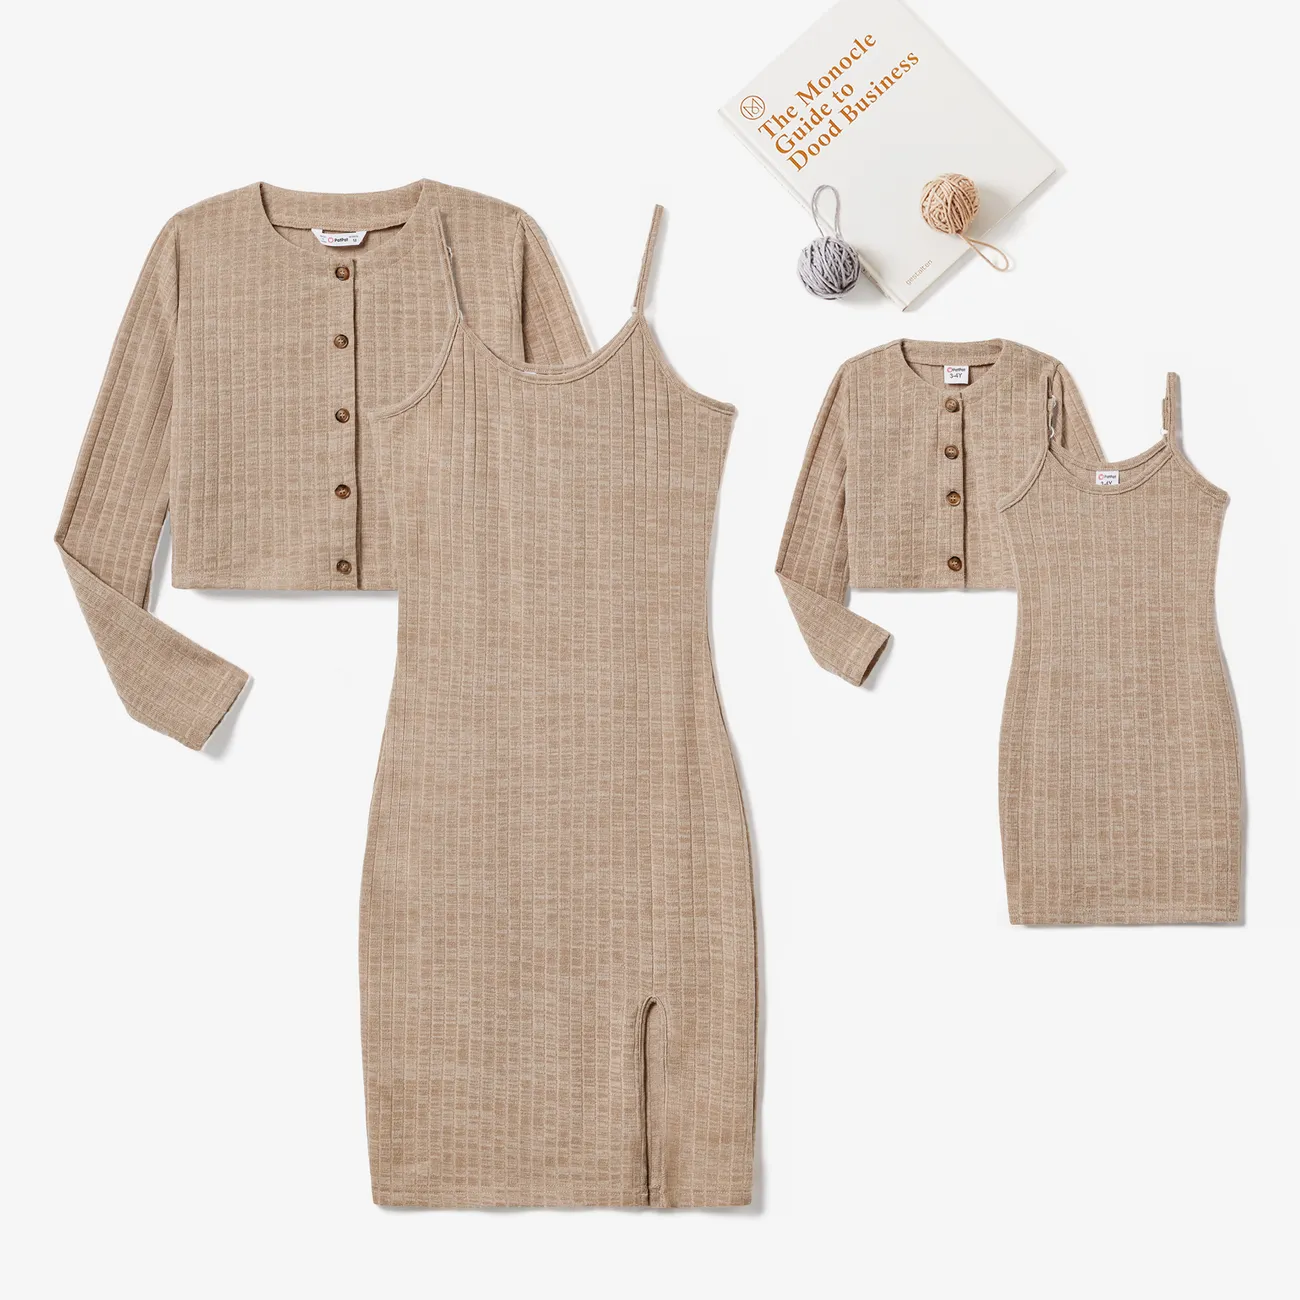 Mommy and Me 2pcs Basic Solid Color Knit Camisole Body-con Dress & Long-sleeve Coat Sets Apricot big image 1